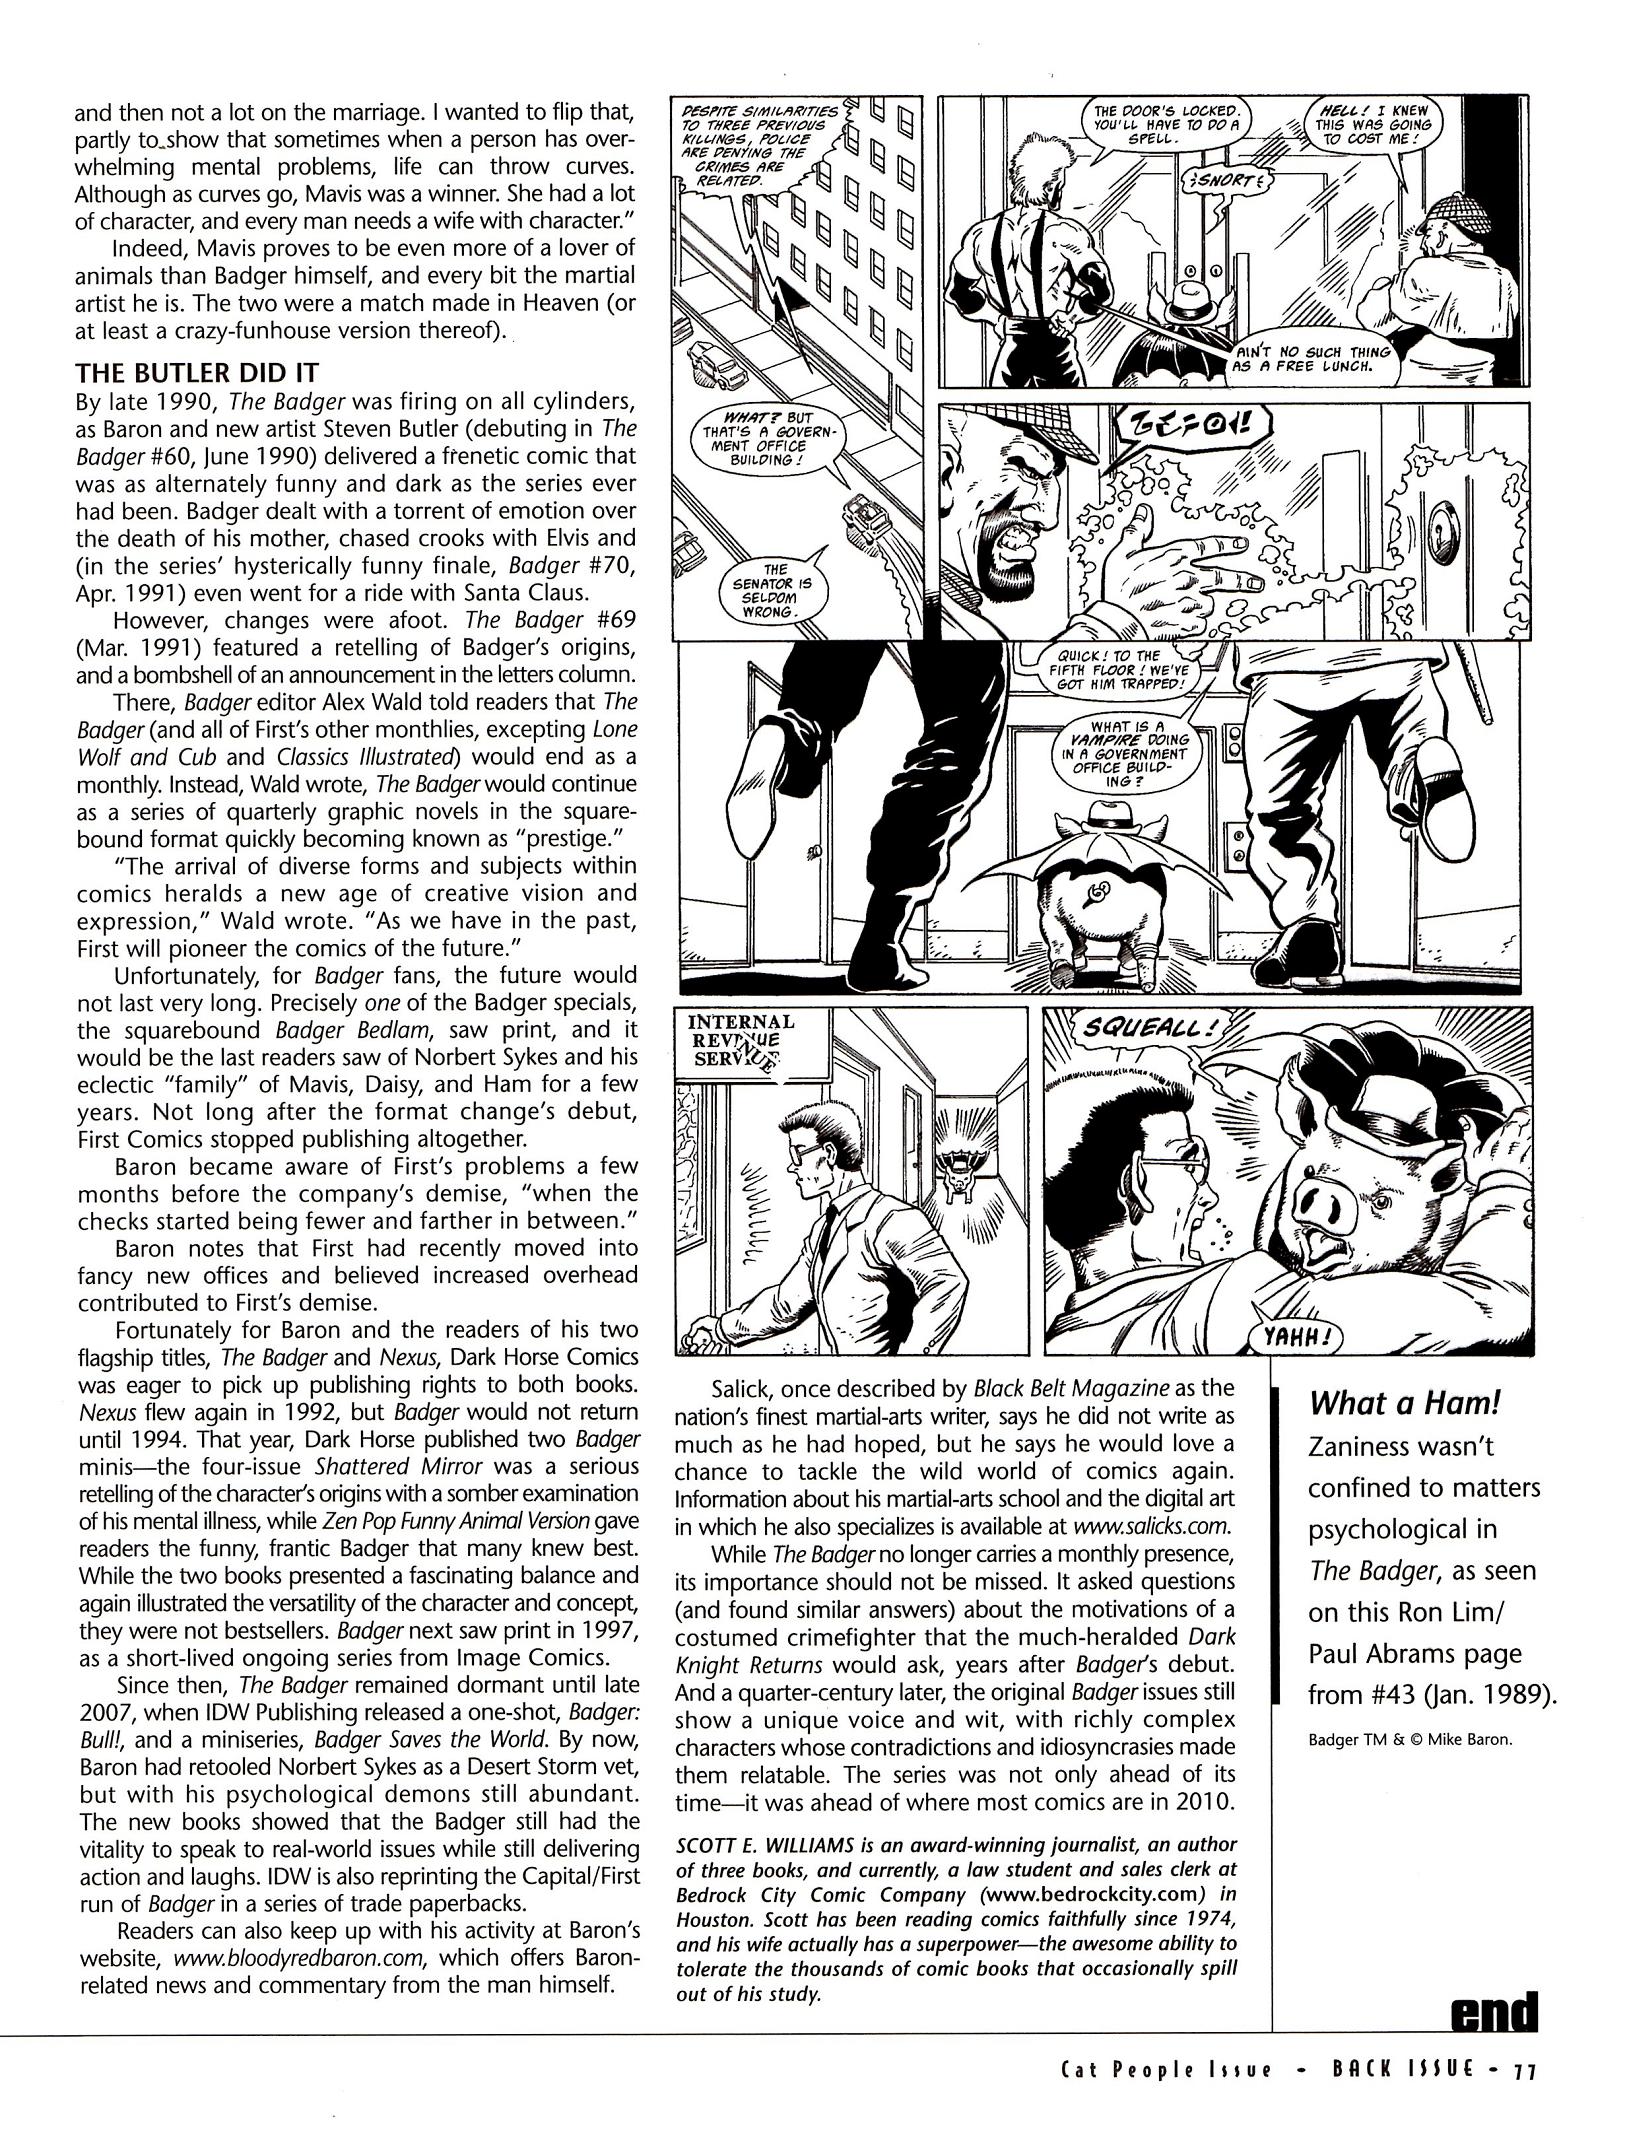 Read online Back Issue comic -  Issue #40 - 78